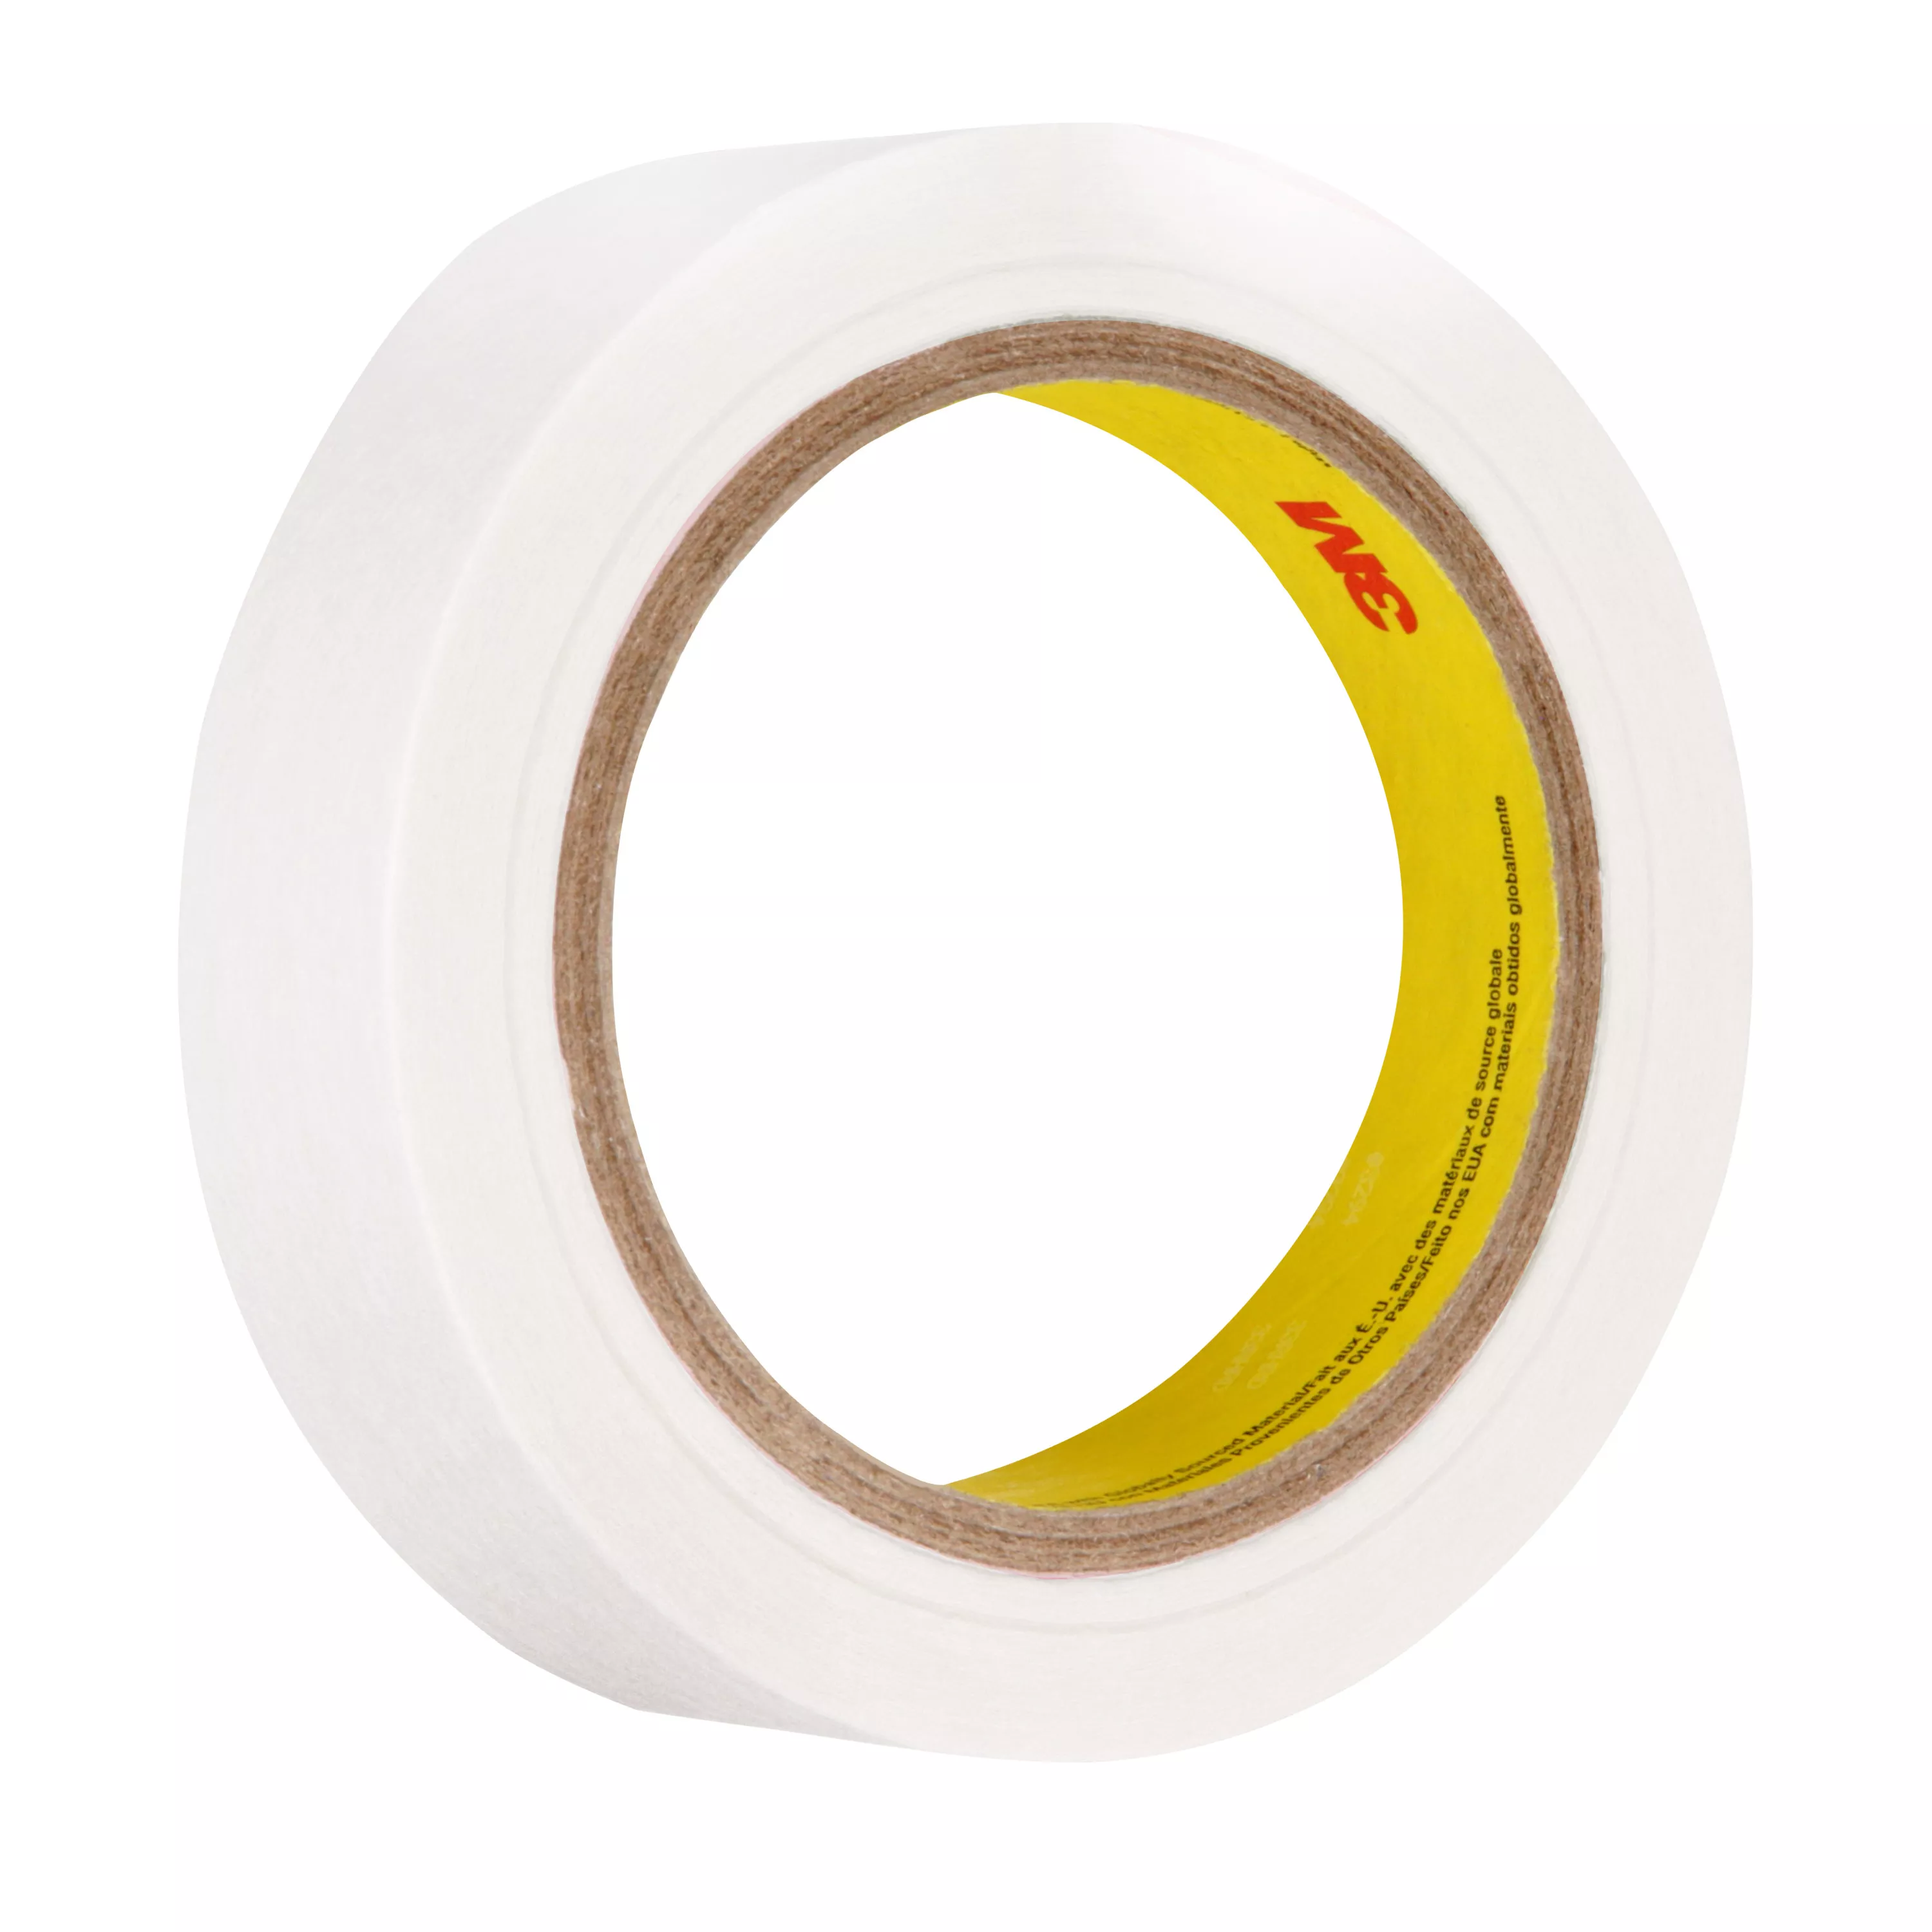 3M™ Vent Tape 394, White, 1 in x 36 yd, 4 mil, 36 Roll/Case